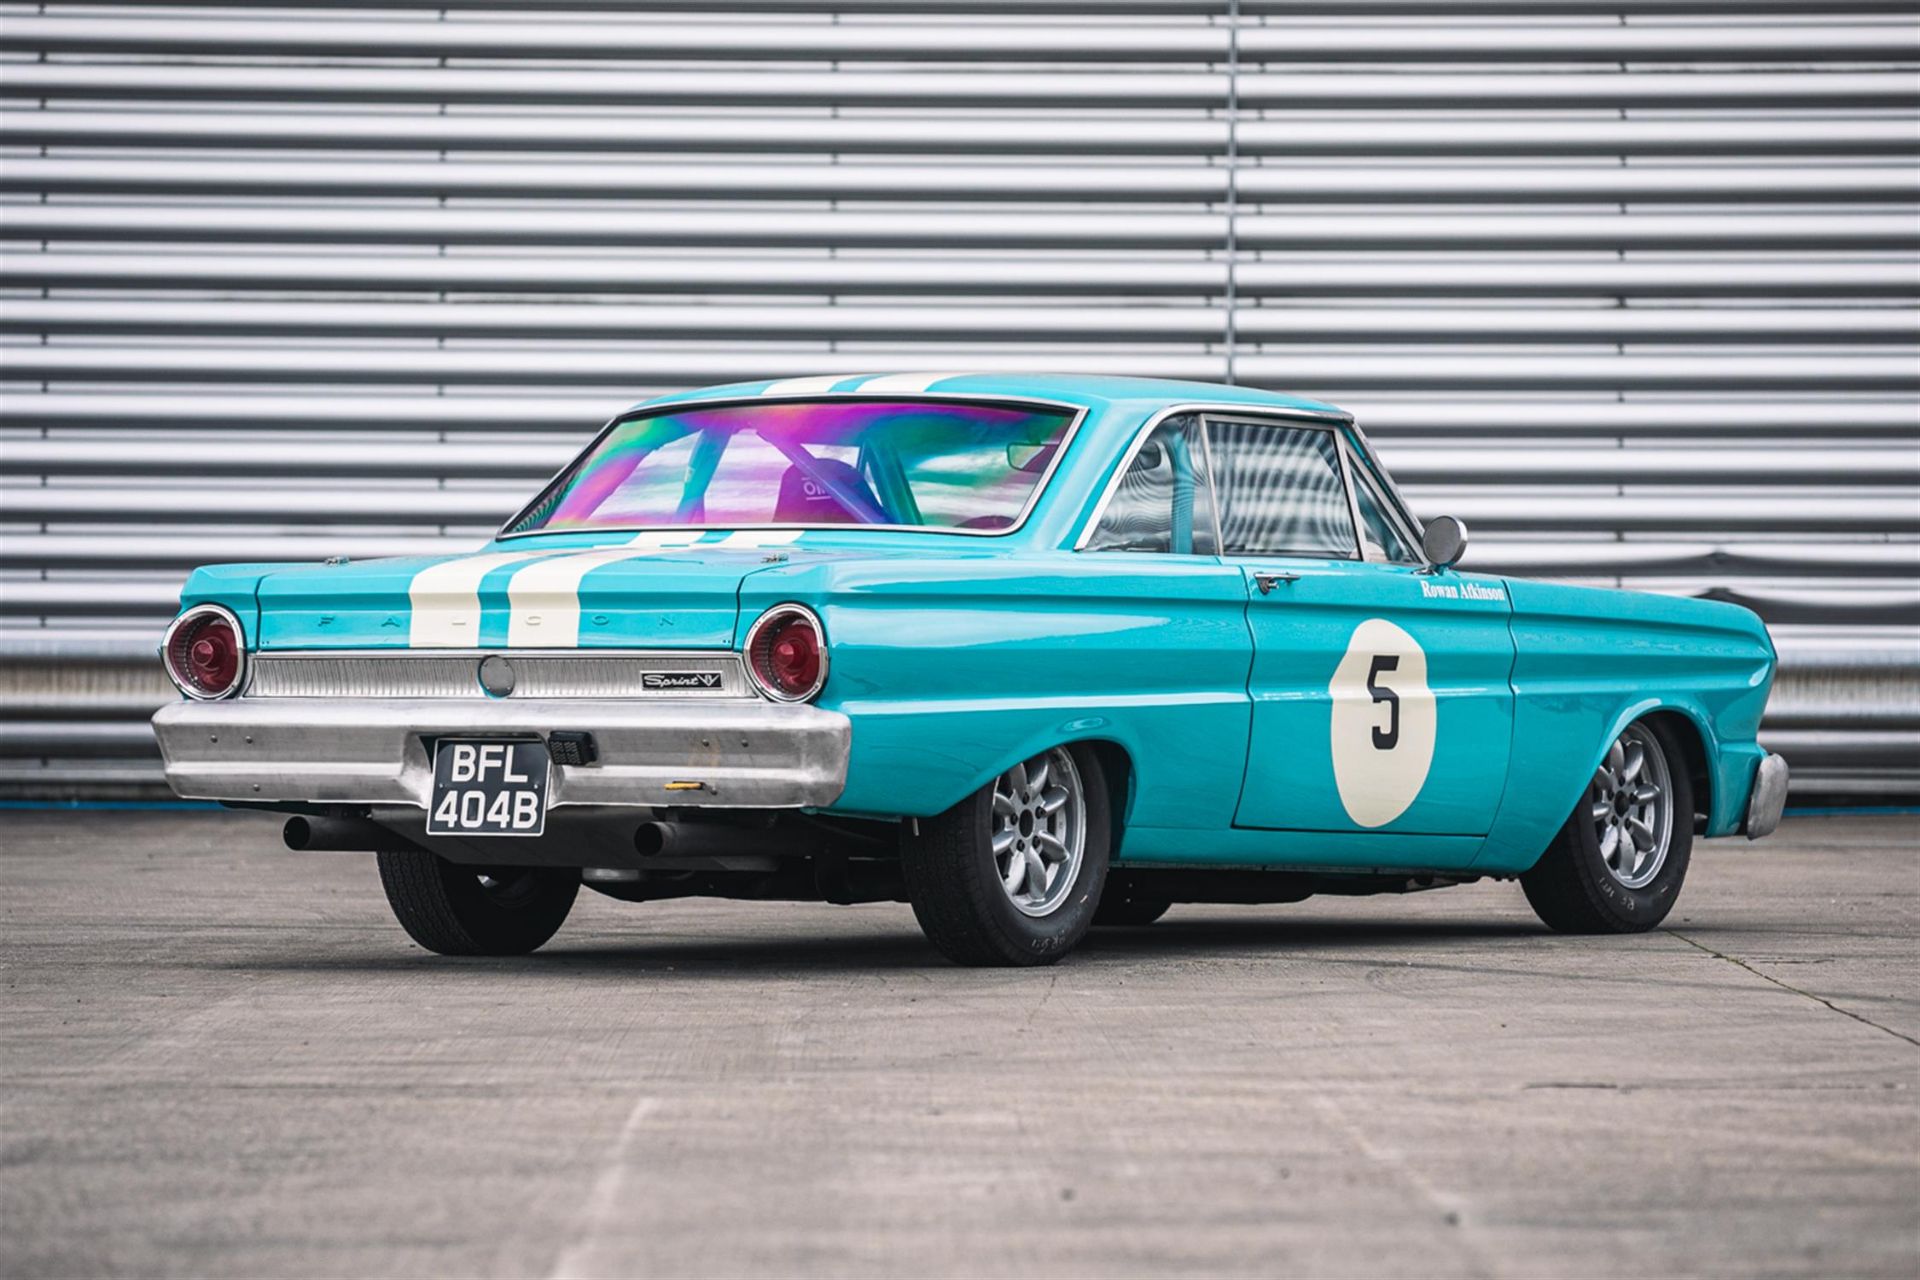 1964 Ford Falcon FIA Race car offered directly from Rowan Atkinson CBE - Image 6 of 10